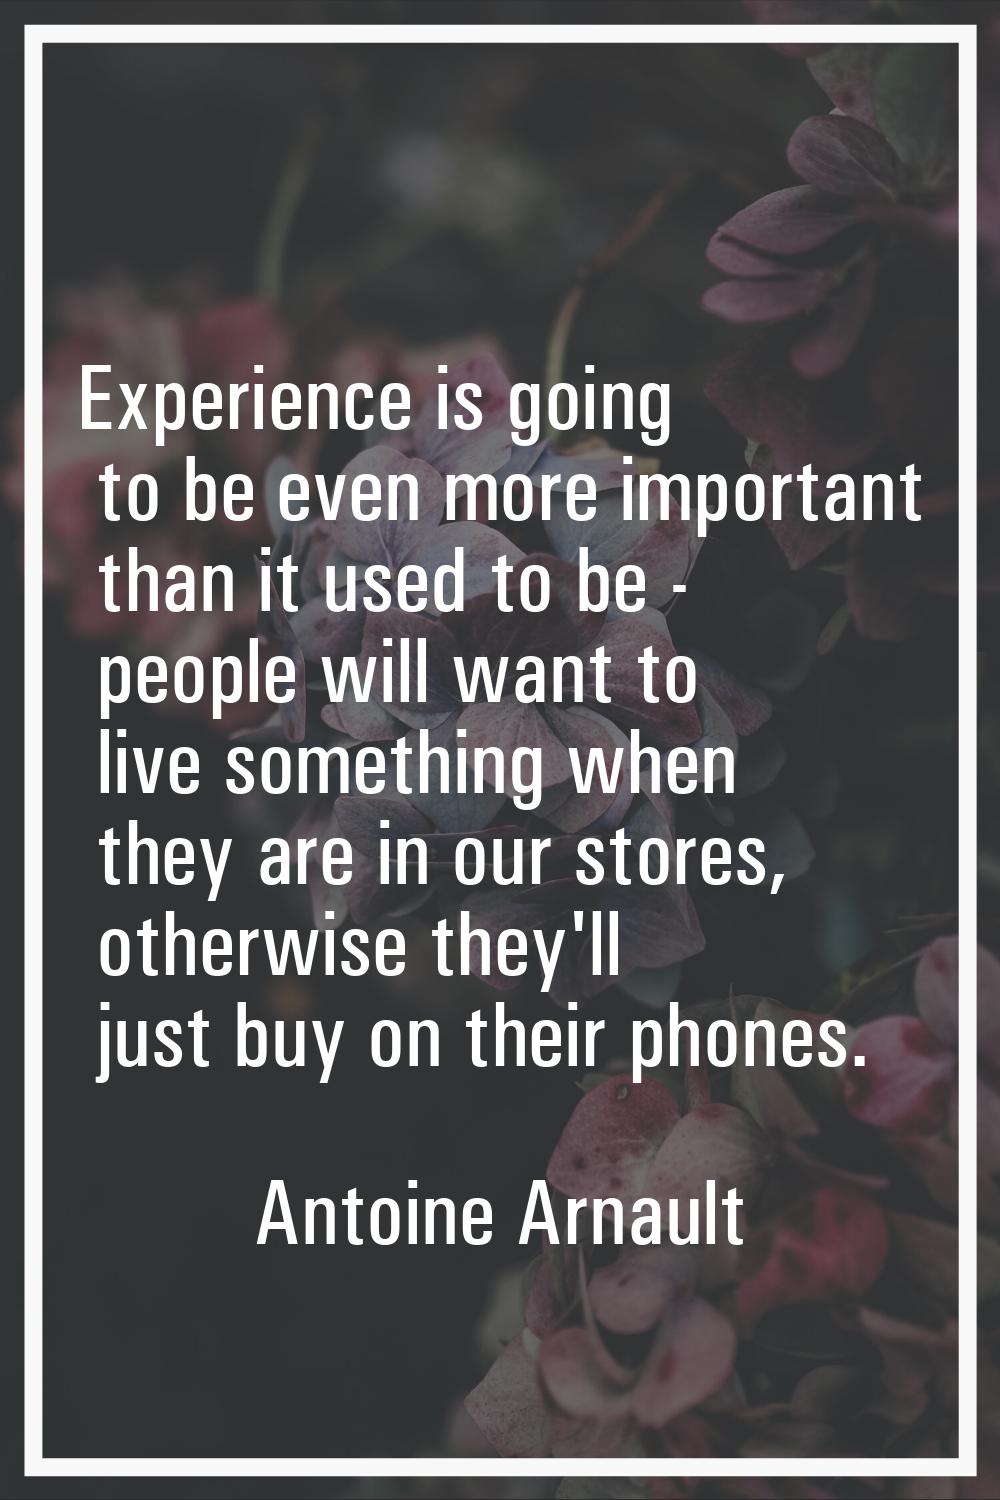 Experience is going to be even more important than it used to be - people will want to live somethi